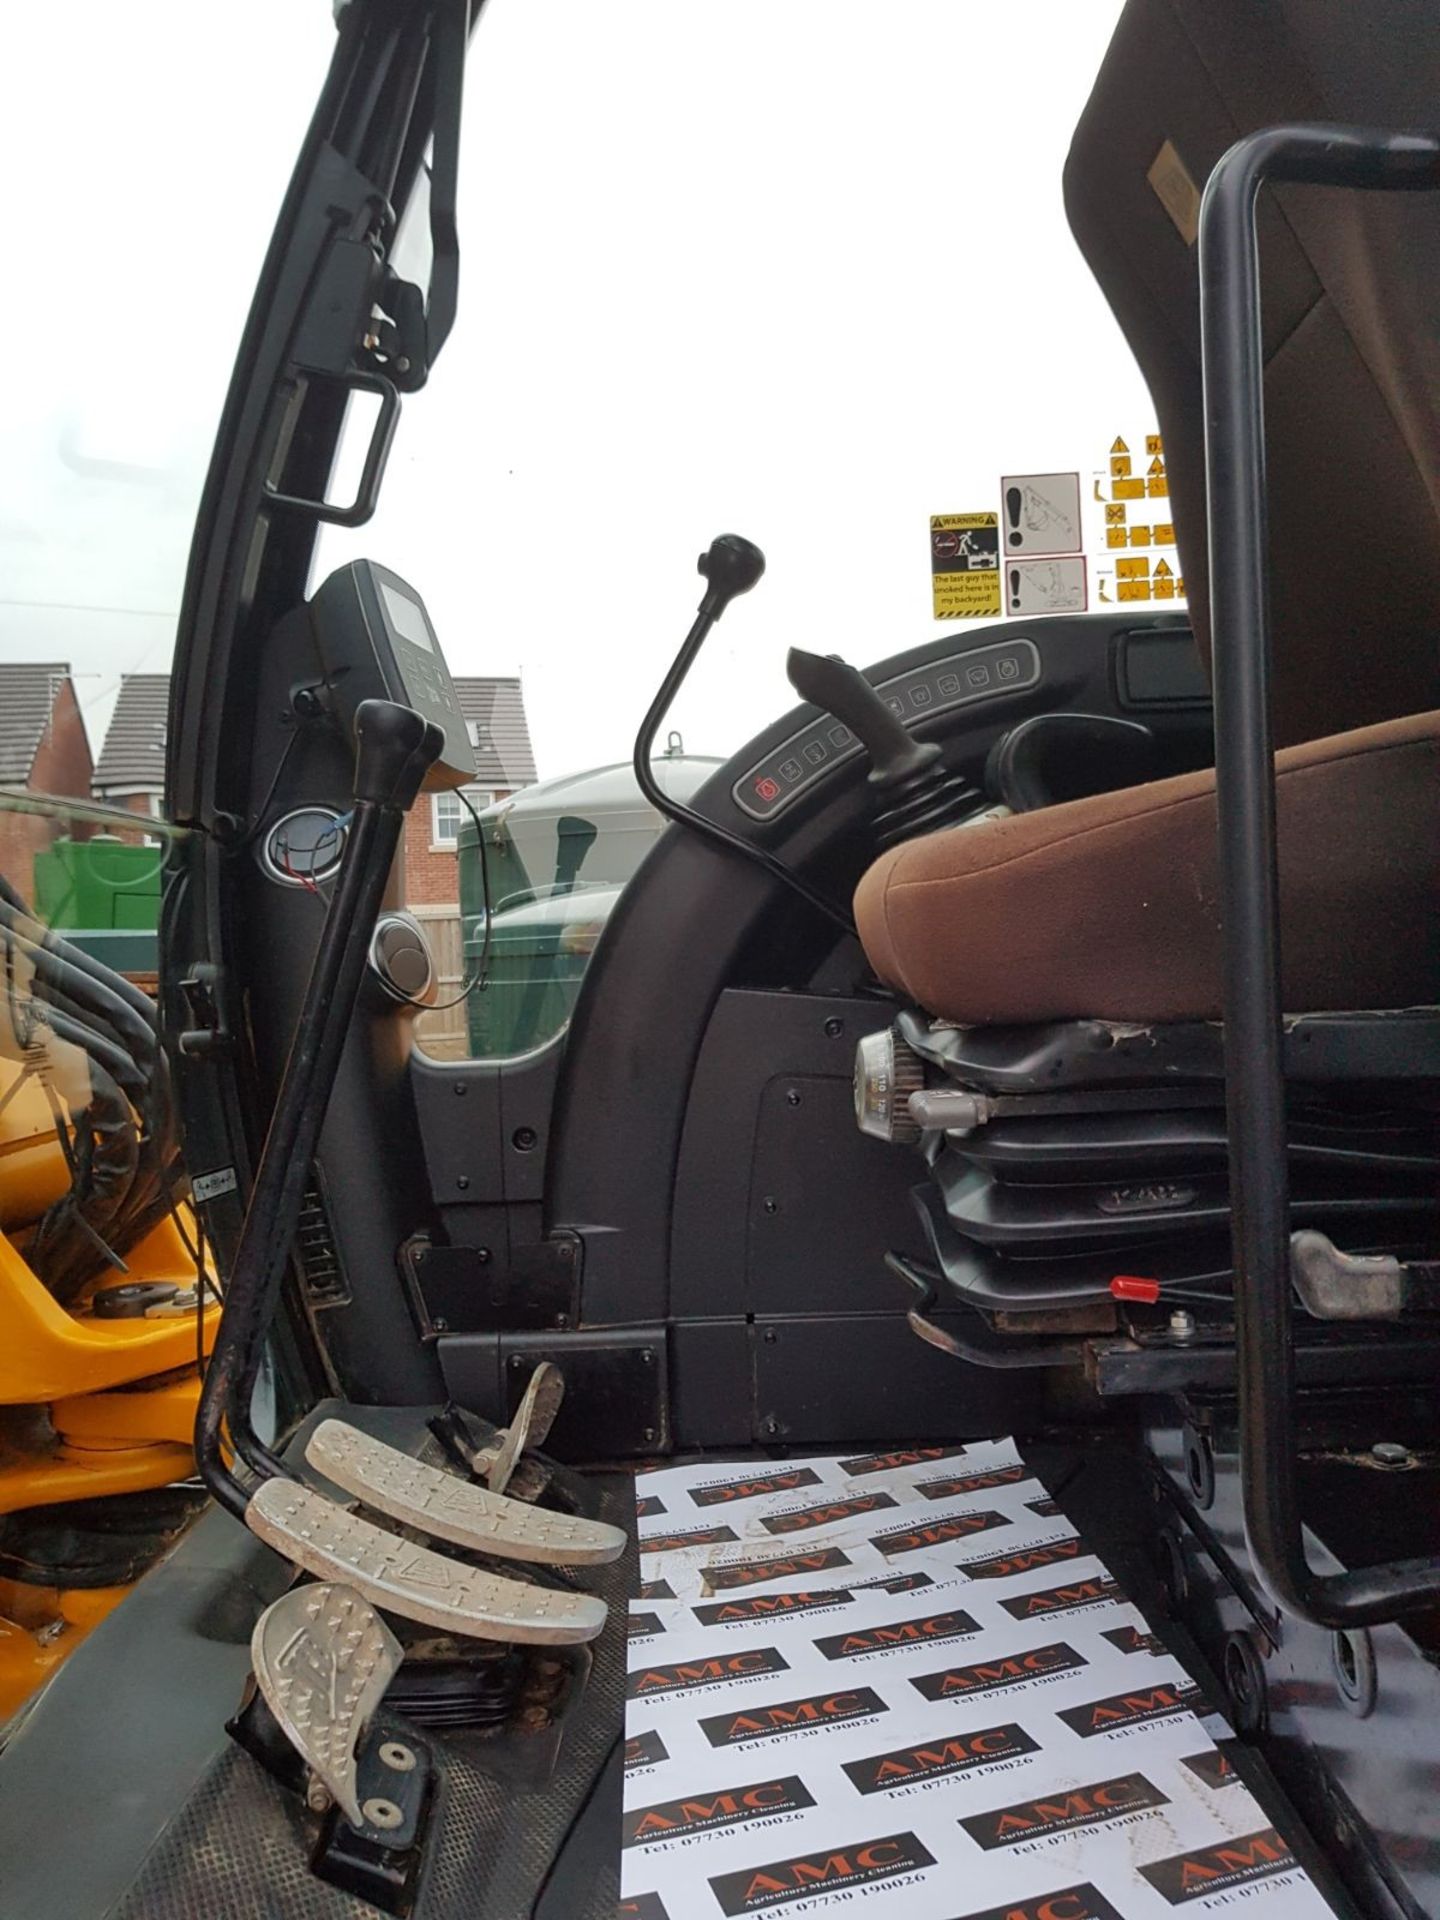 JCB 8085 360° Midi Excavator, Serial No -, Year of Manufacture -, Indicated Hours: 4320, Wide - Image 10 of 10